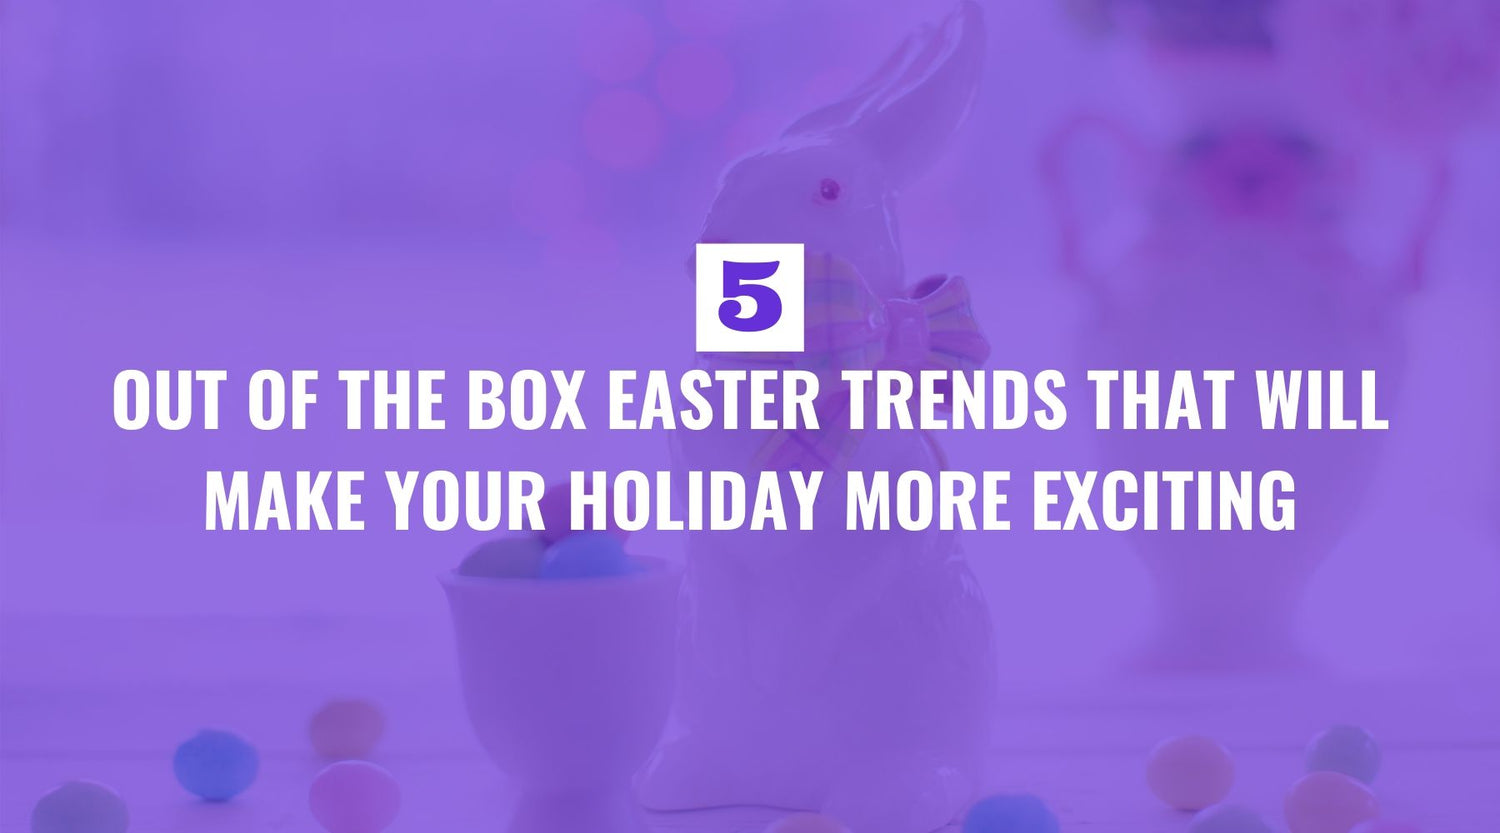 Five Out of the Box Easter Trends That Will Make Your Holiday More Exciting